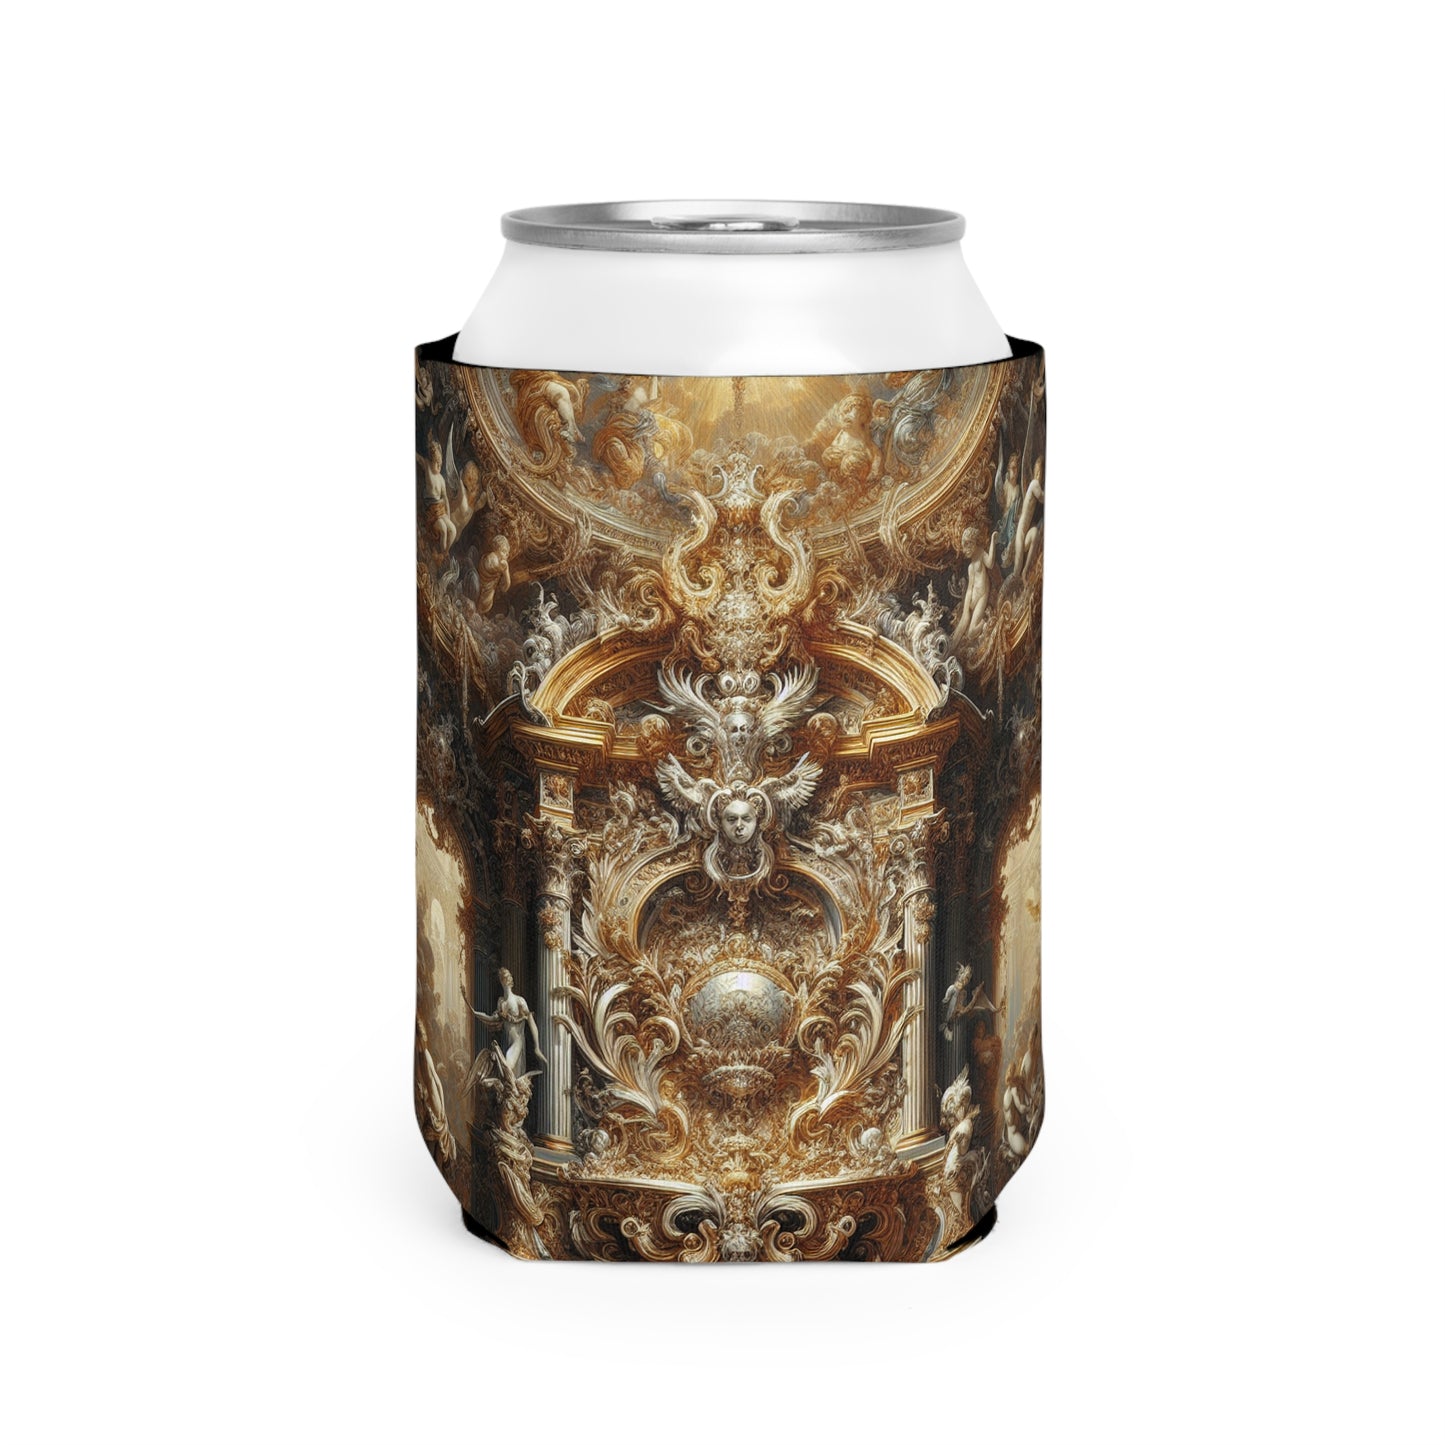 "Baroque Banquet: A Feast of Opulence" - The Alien Can Cooler Sleeve Baroque